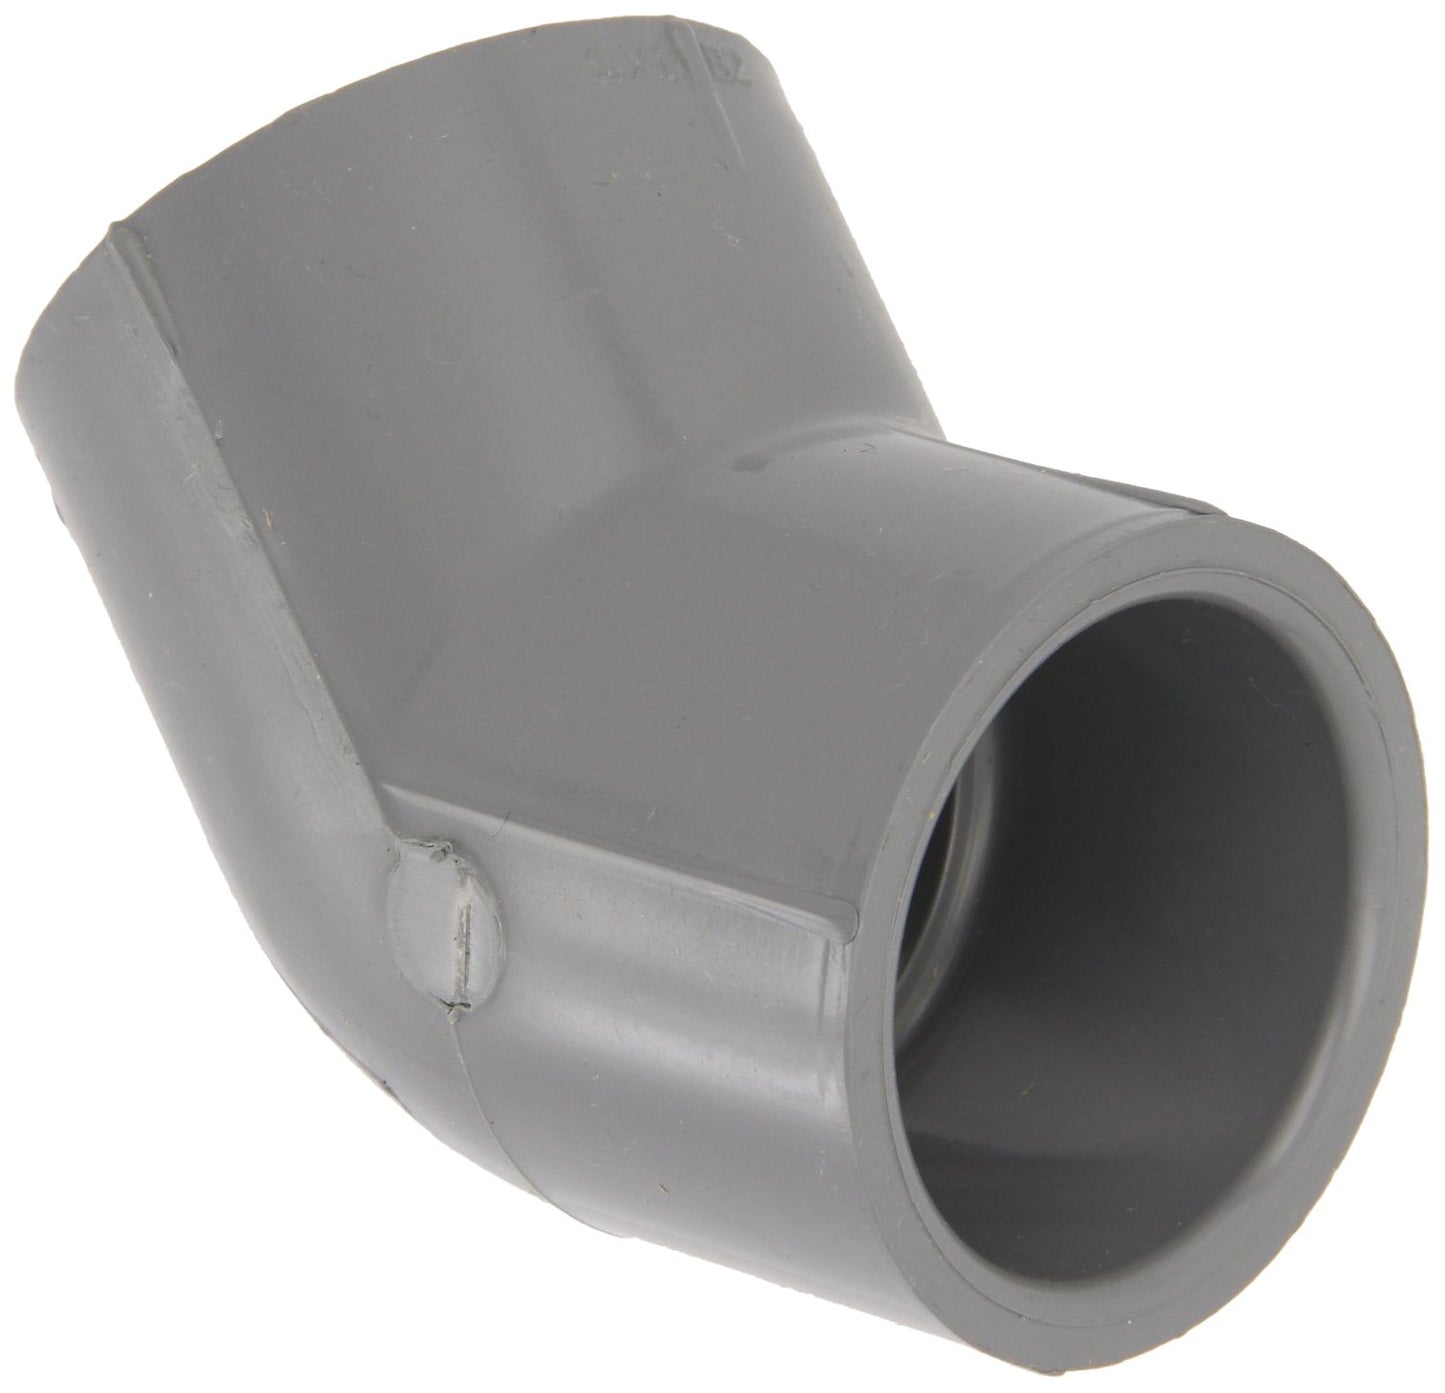 Spears 817-060C - CPVC Pipe Fitting, 45 Degree Elbow, Schedule 80, 6" Socket